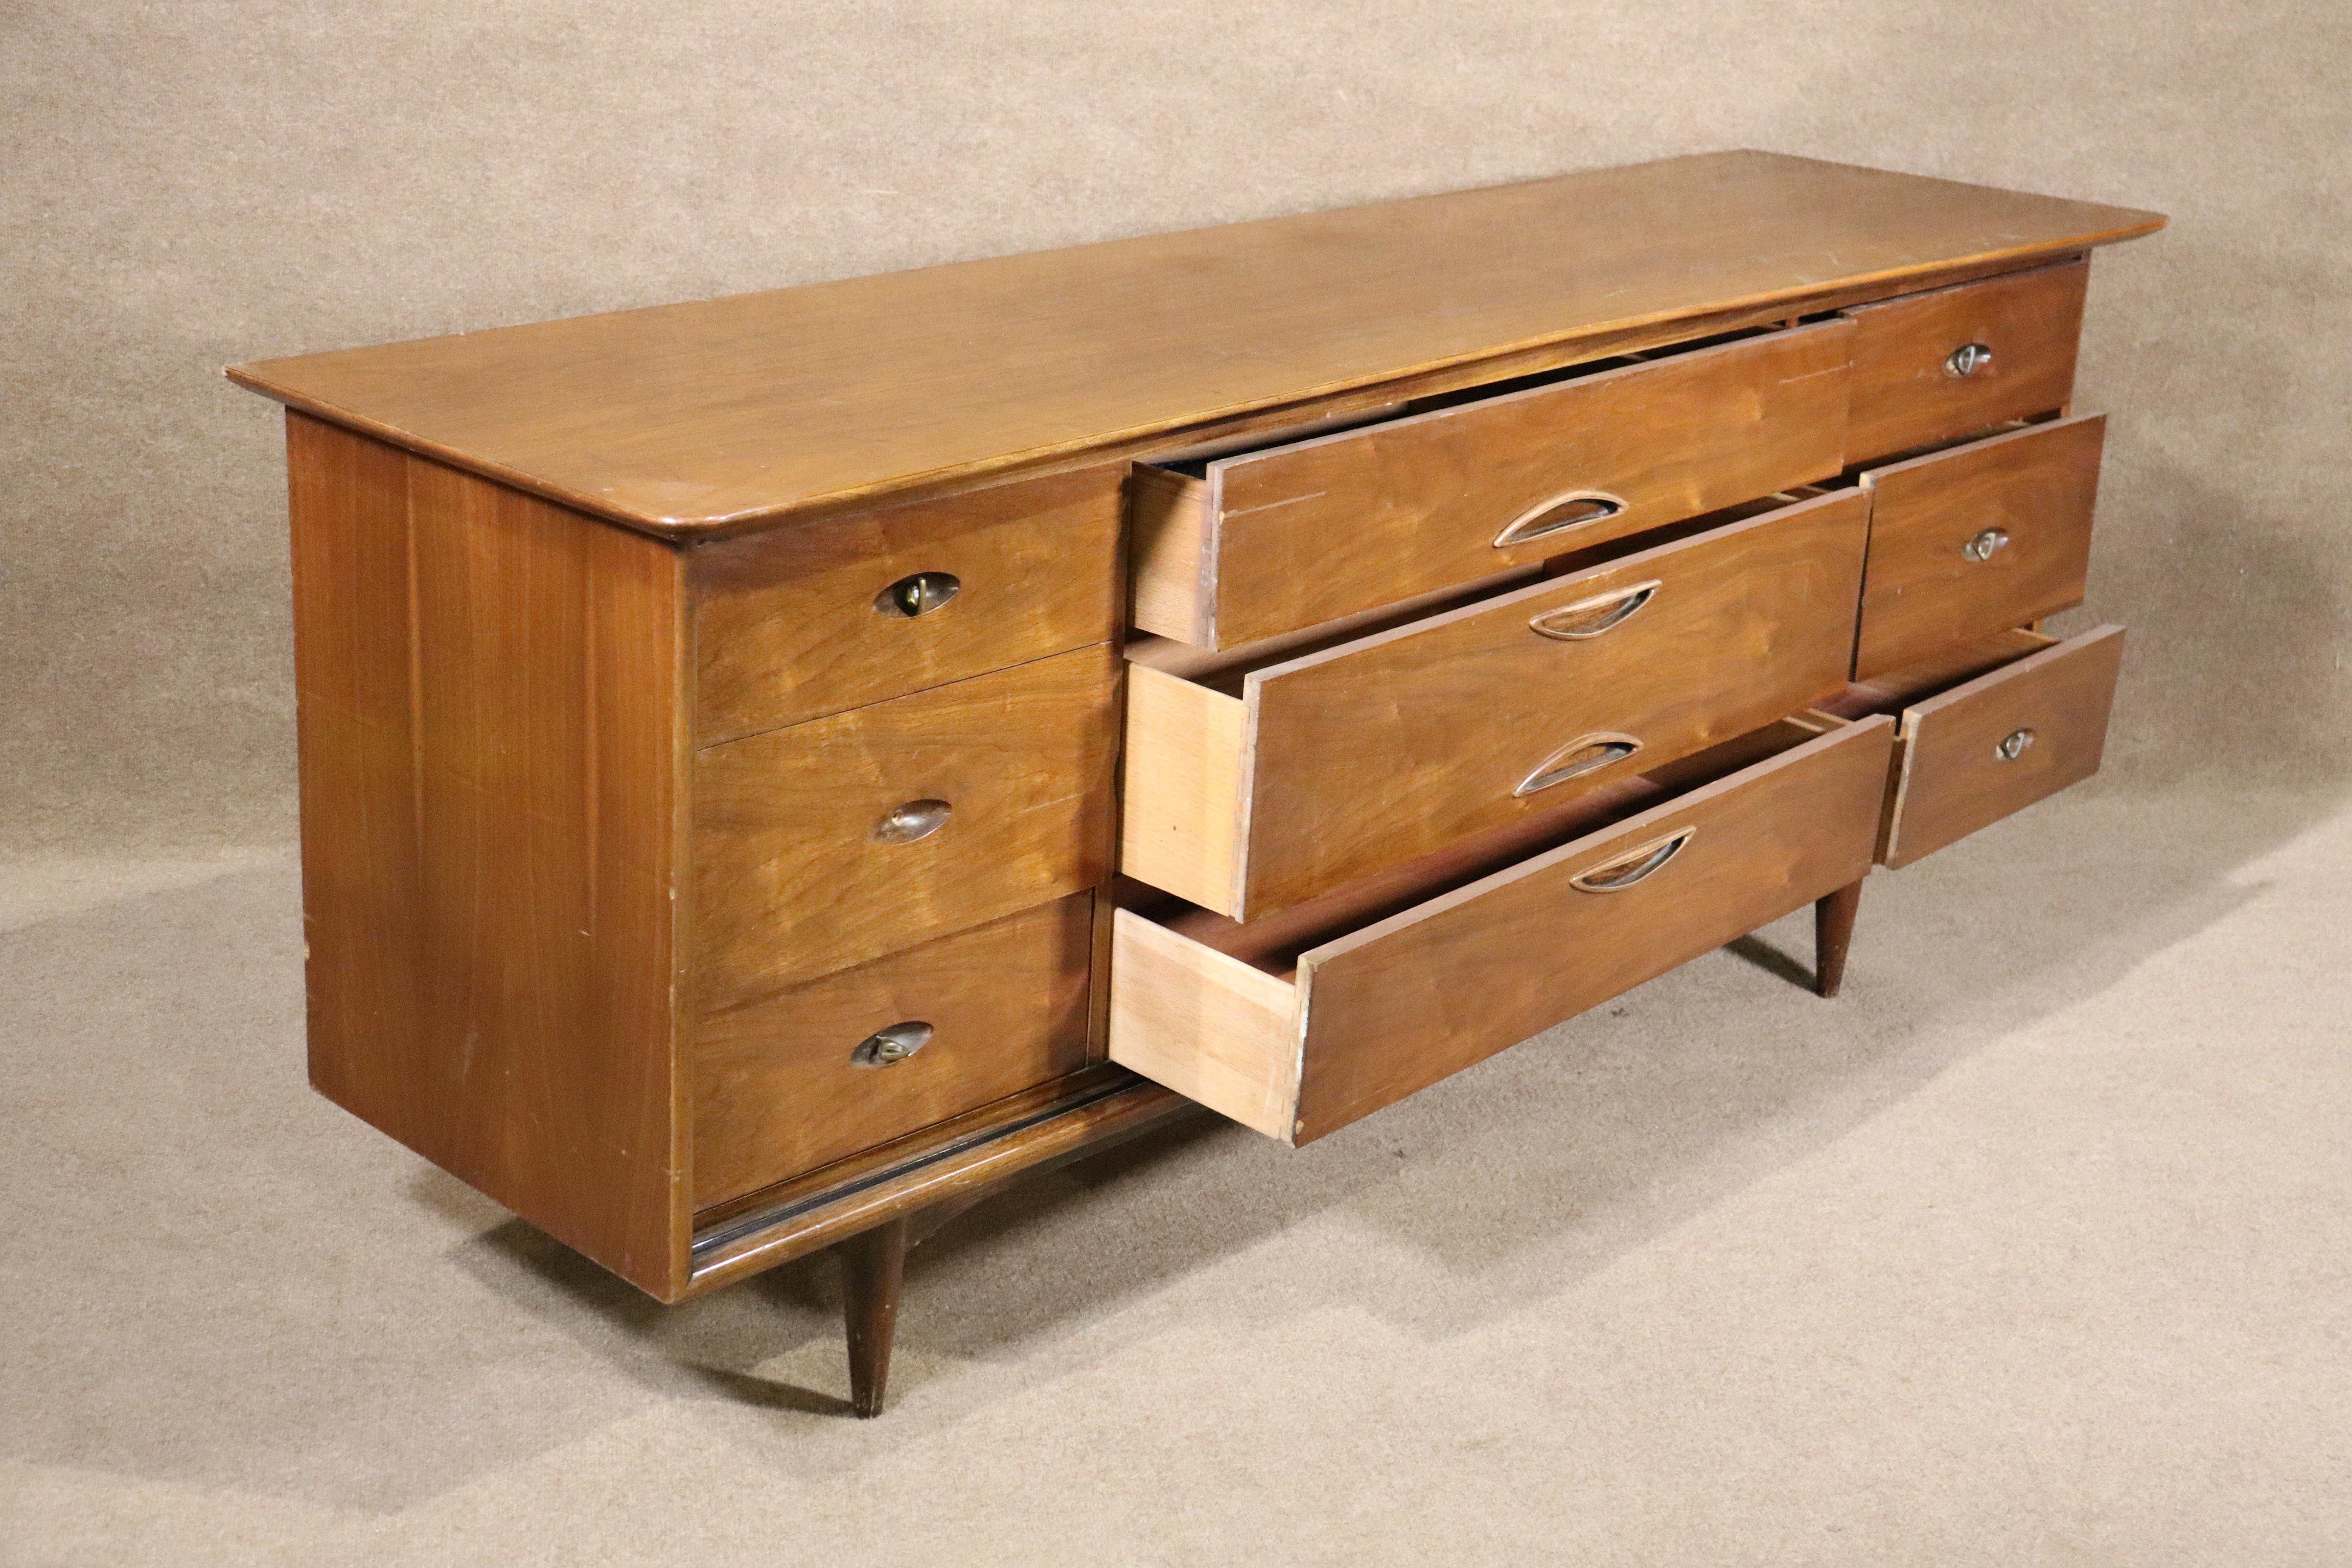 Long mid-century modern dresser made by Kent Coffey for their 